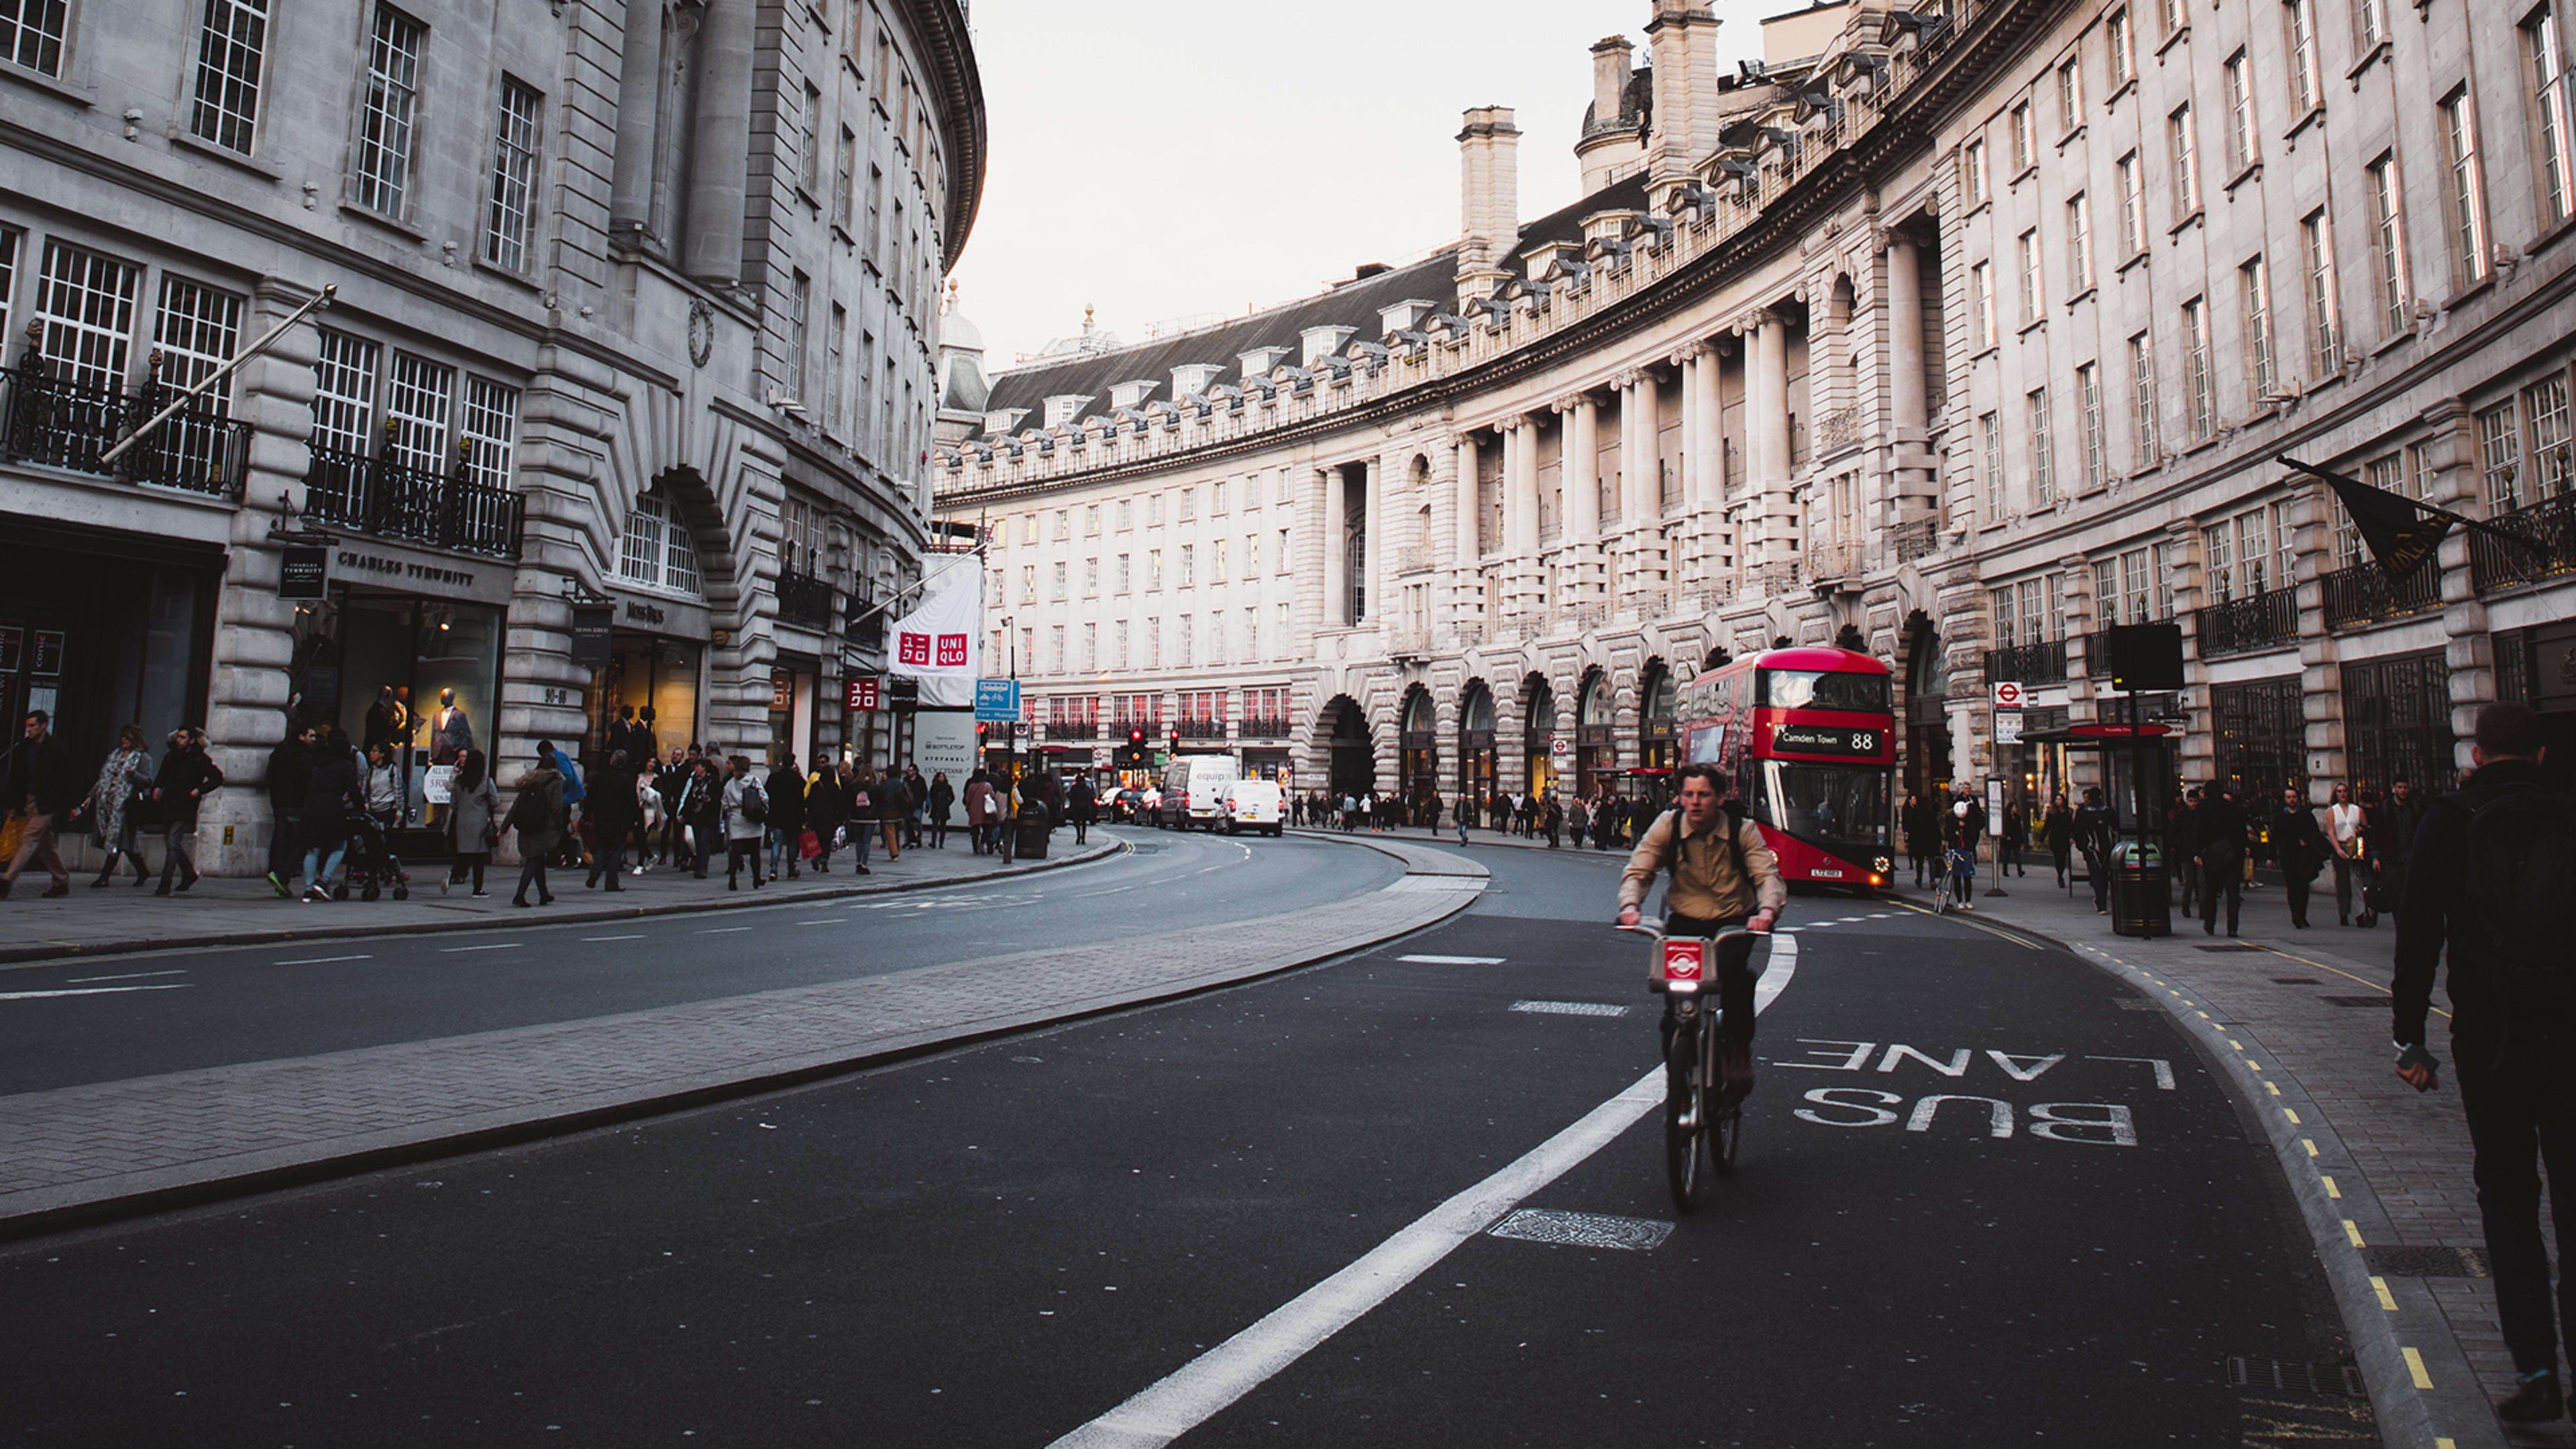 The City of London is kicking cars off half its roads